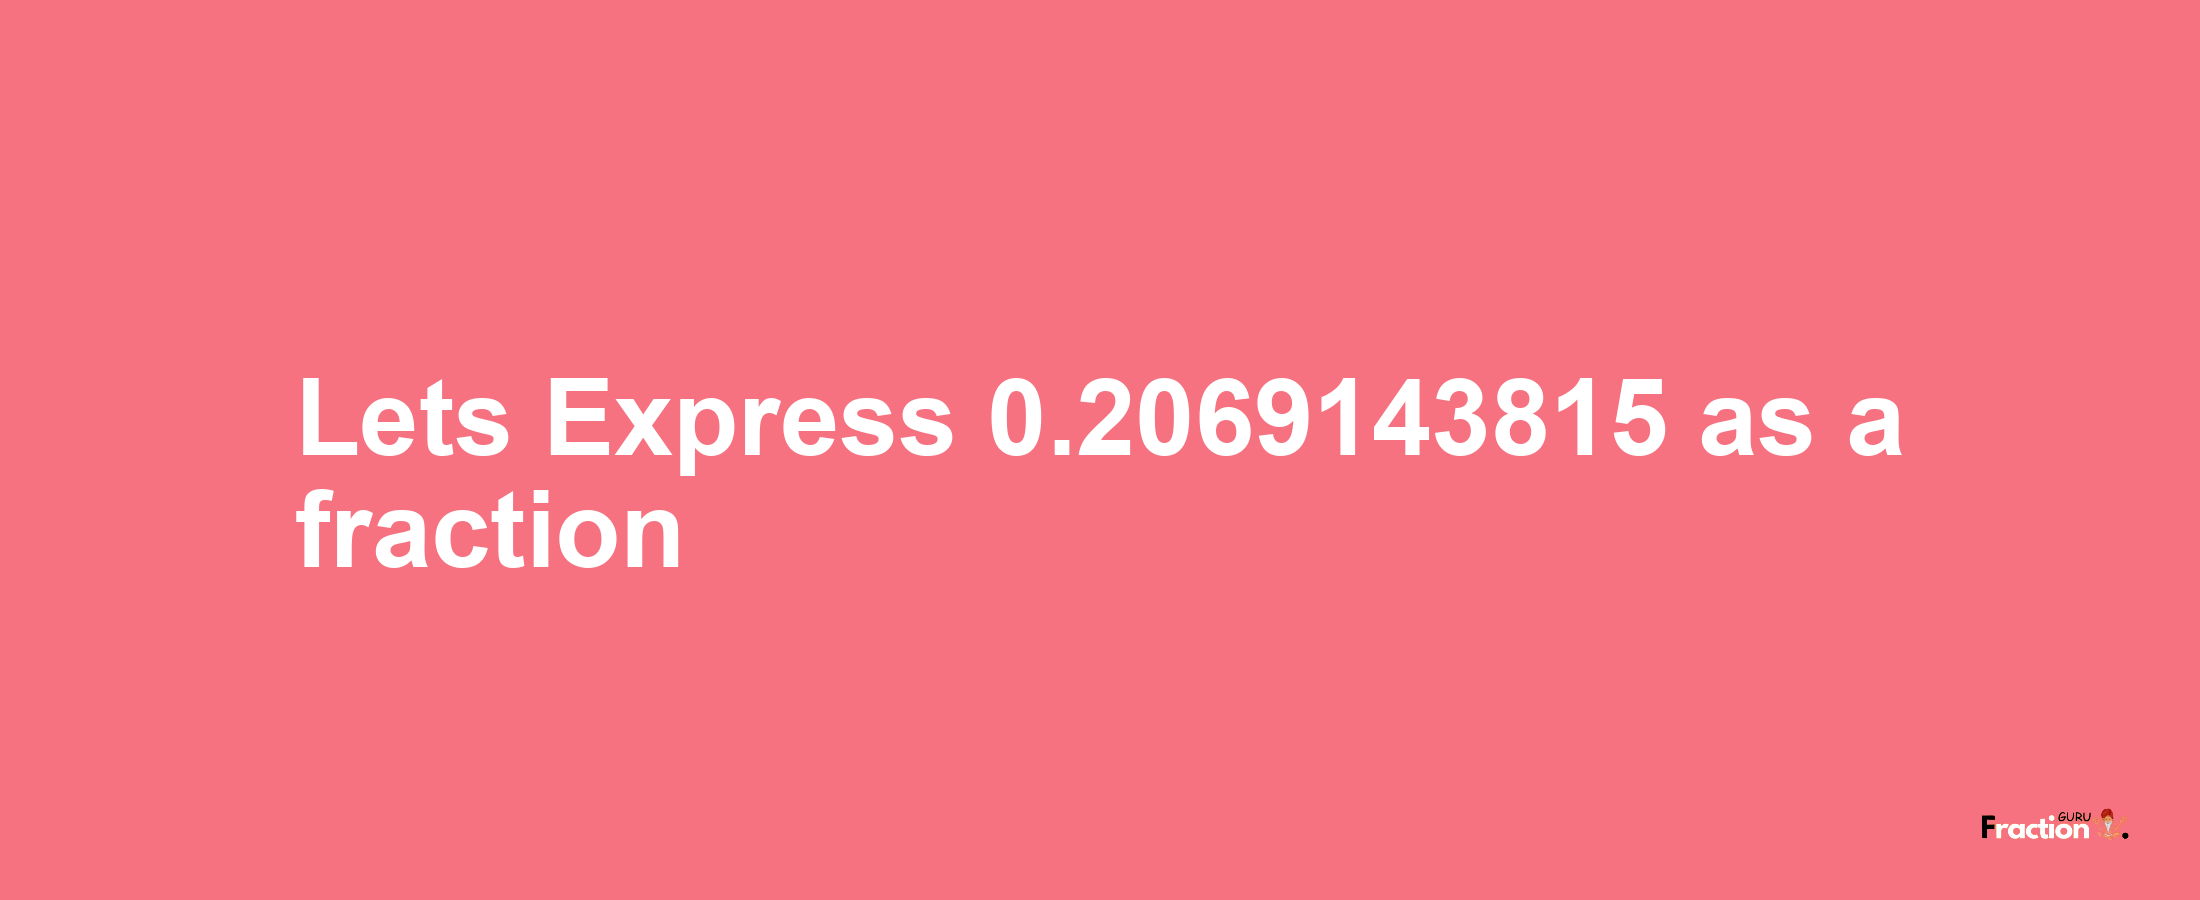 Lets Express 0.2069143815 as afraction